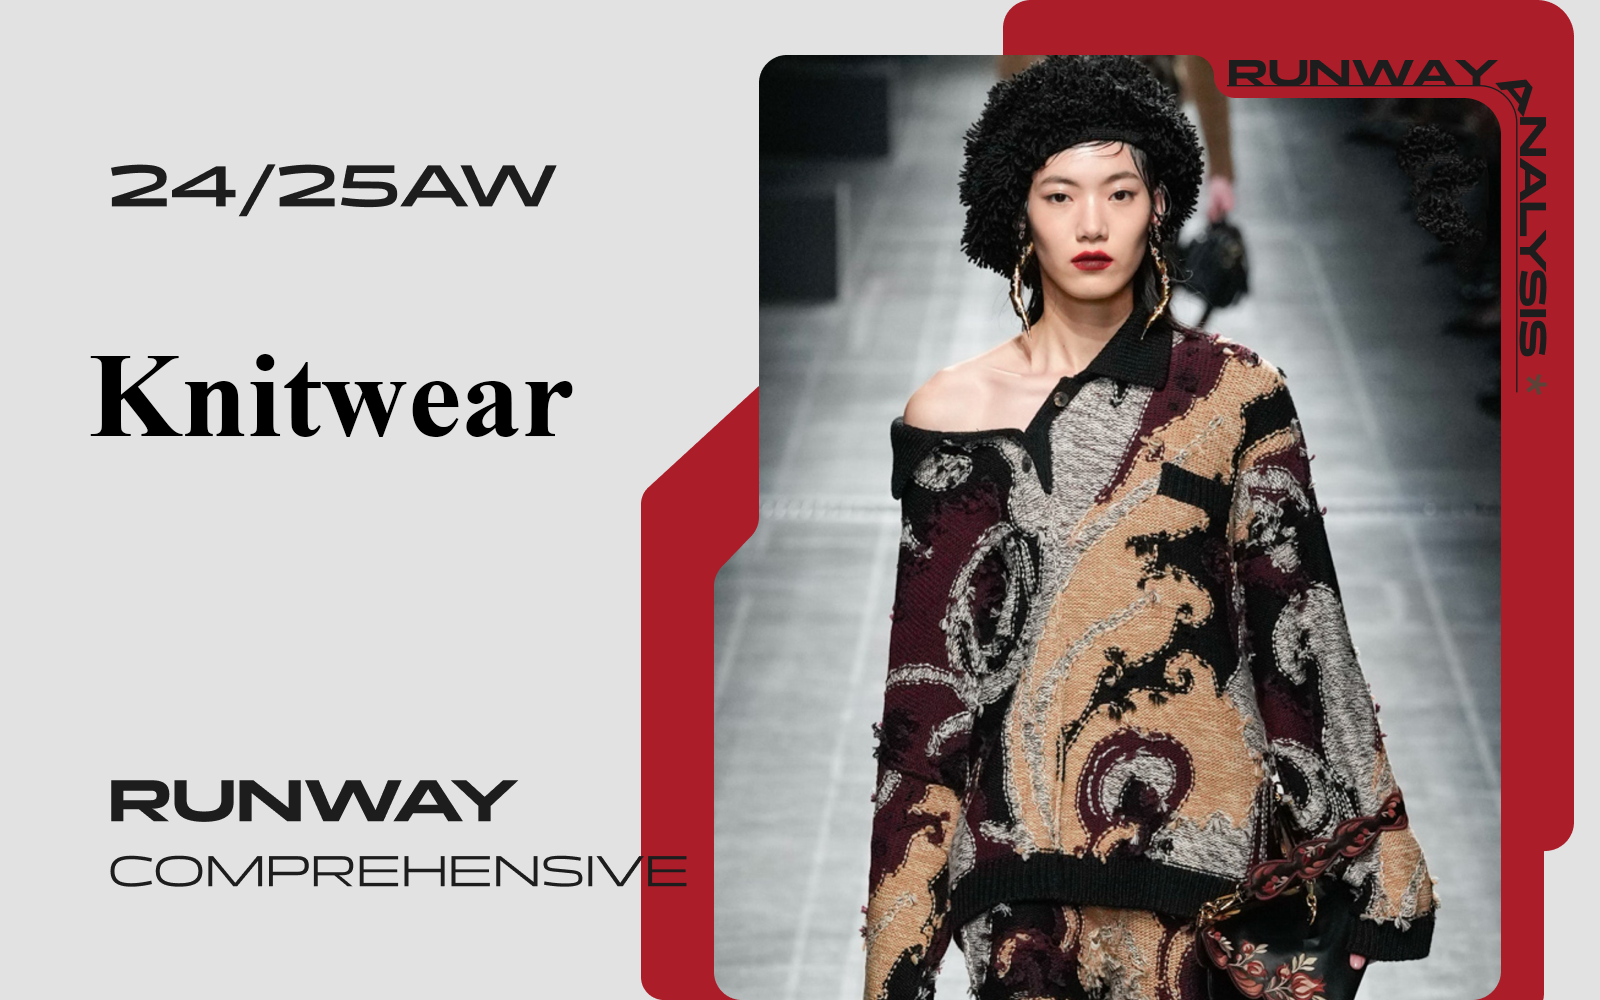 The Comprehensive Runway Analysis of A/W 24/25 Women's Knitwear